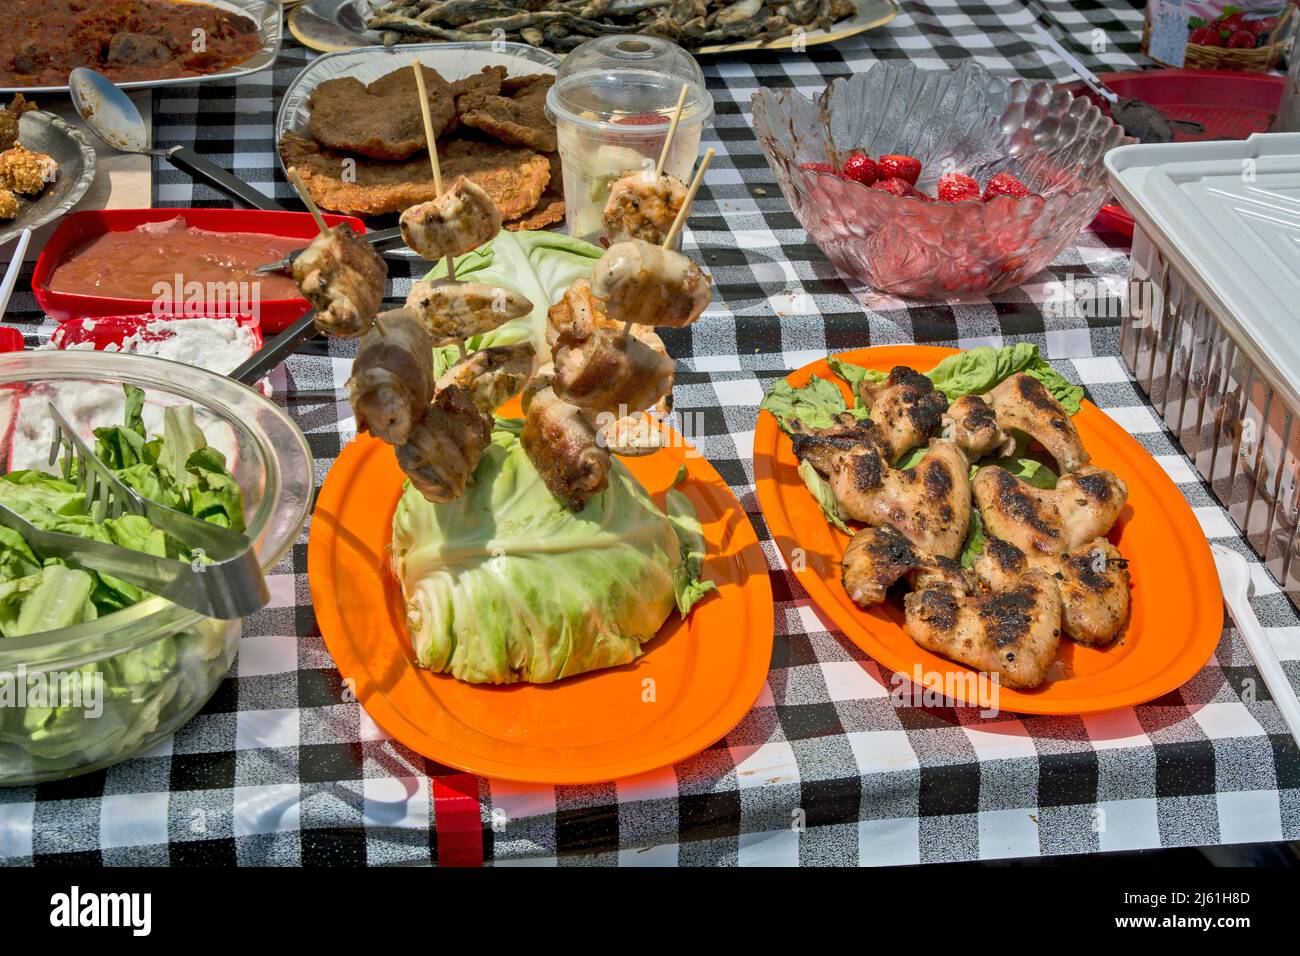 Offering food that includes barbecue, salads, strawberry toppings and more. Stock Photo